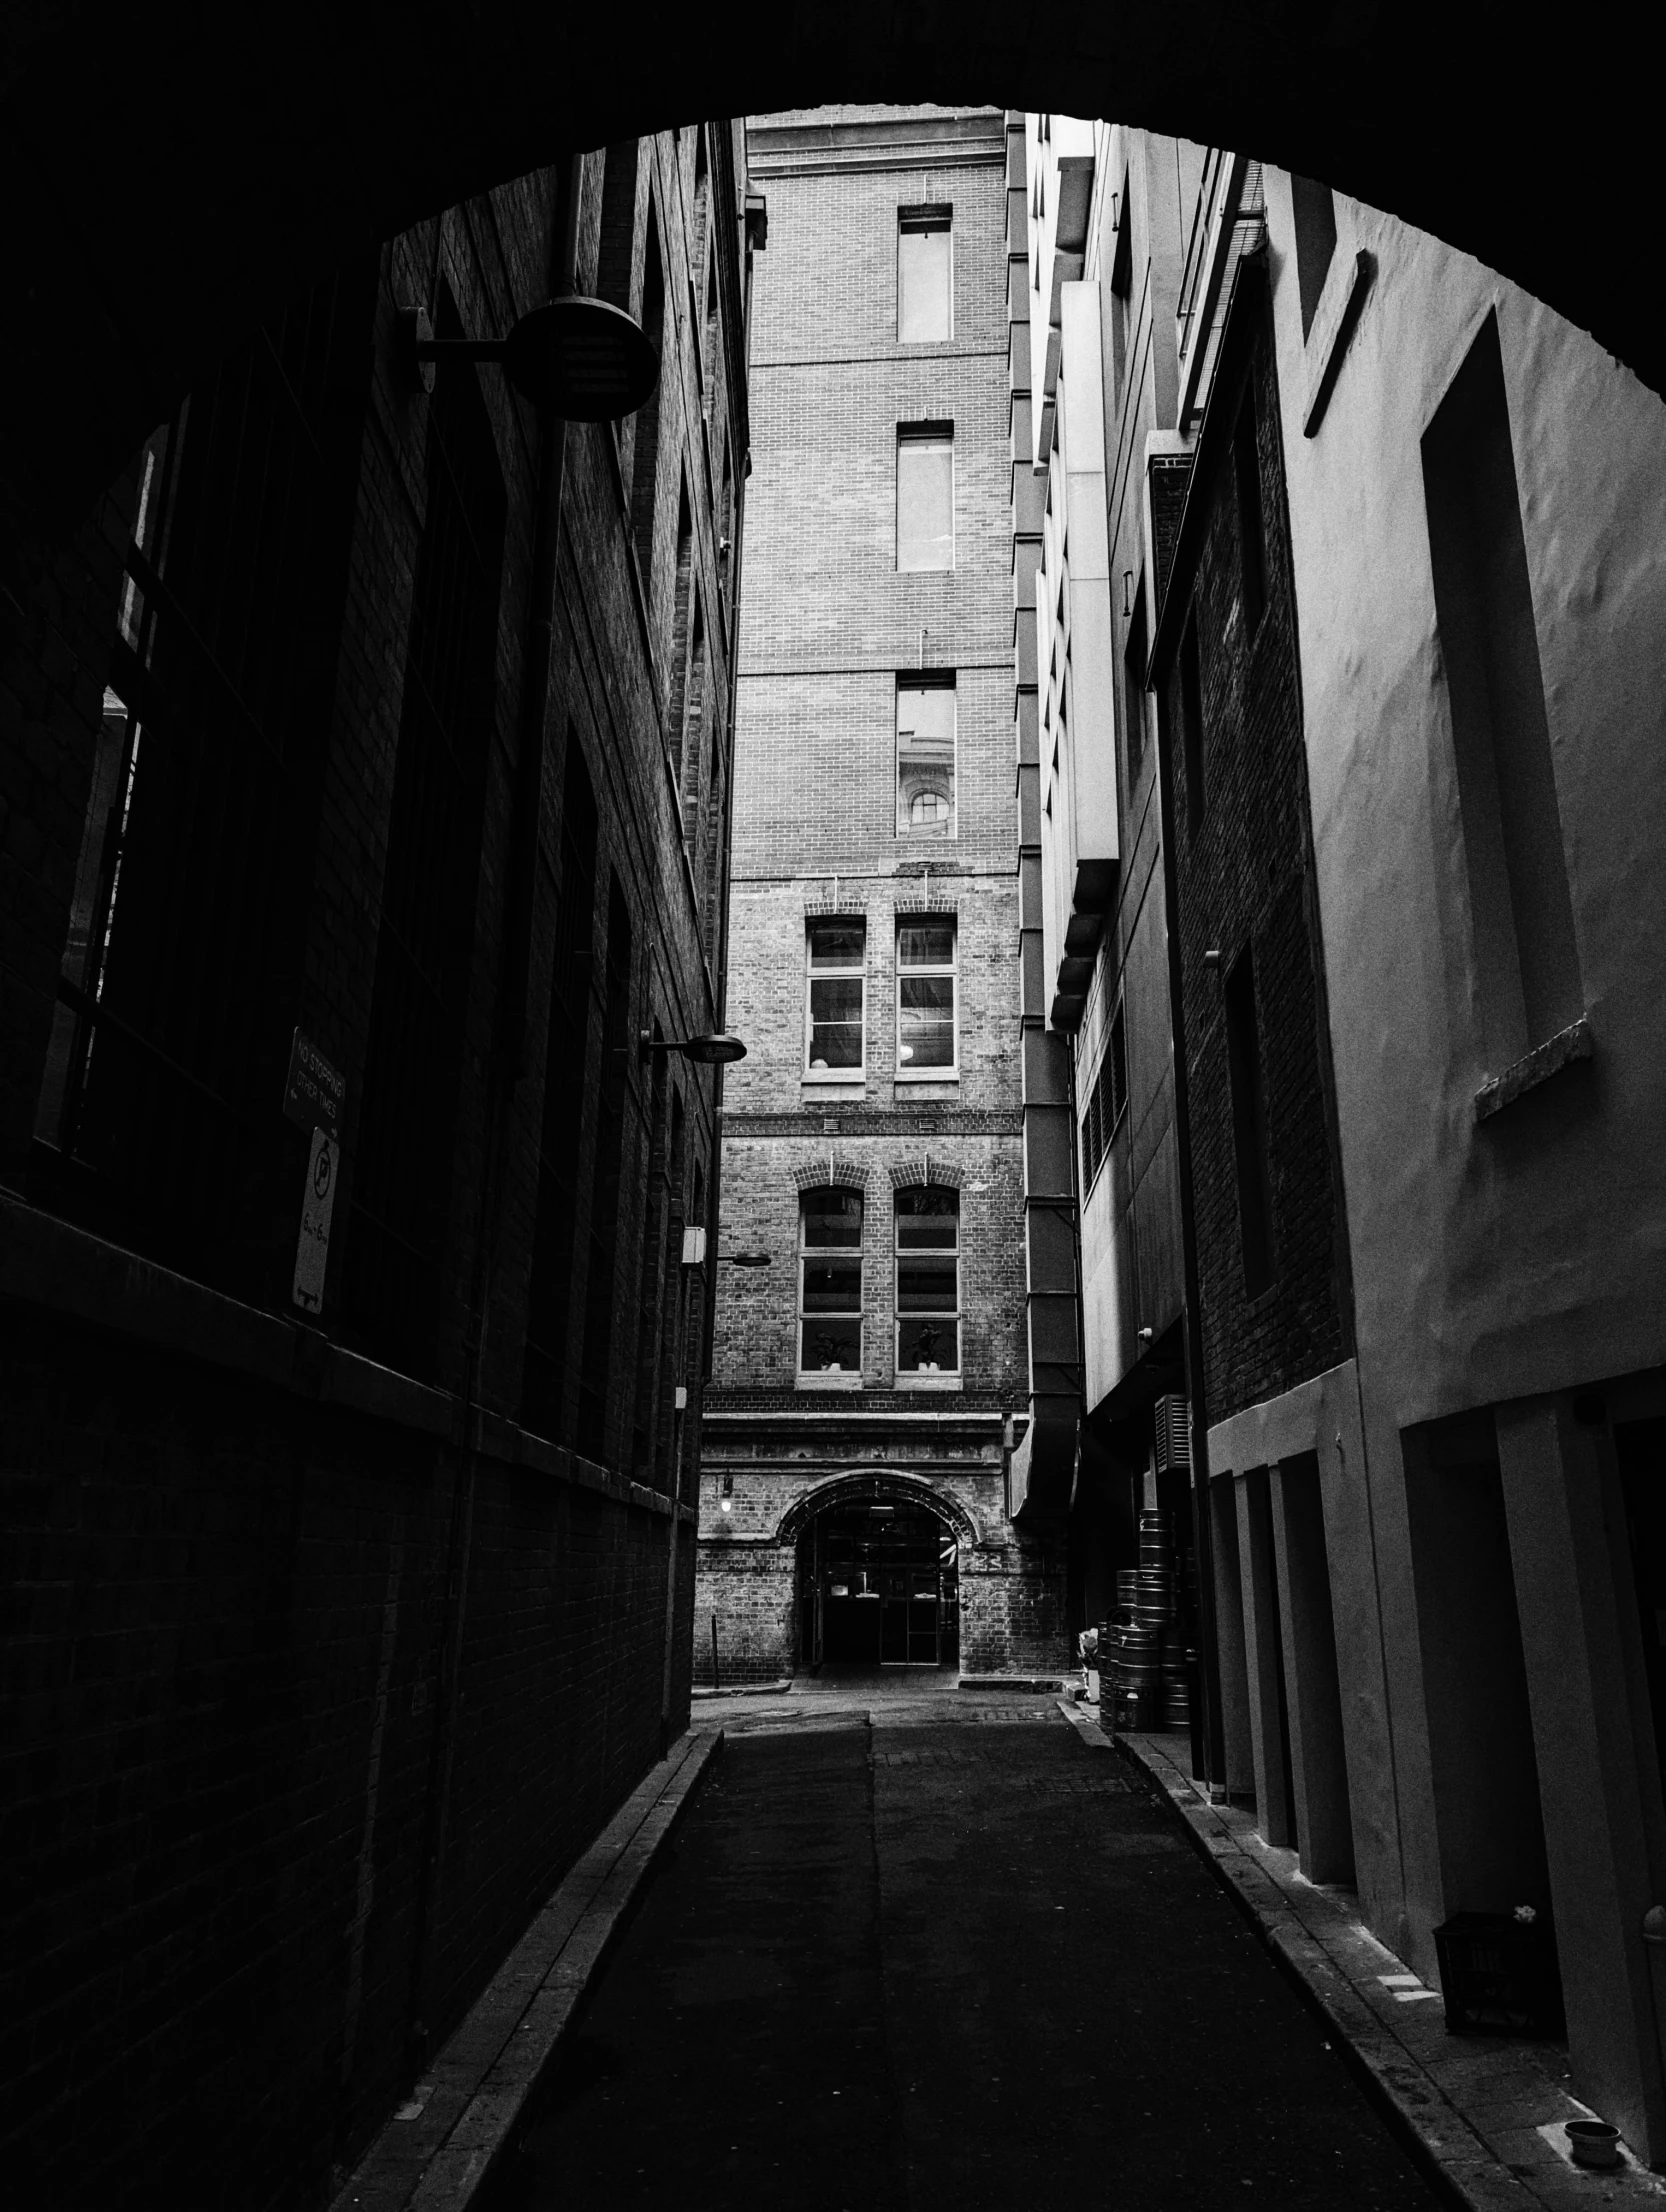 view from a dark alley into an old brick building